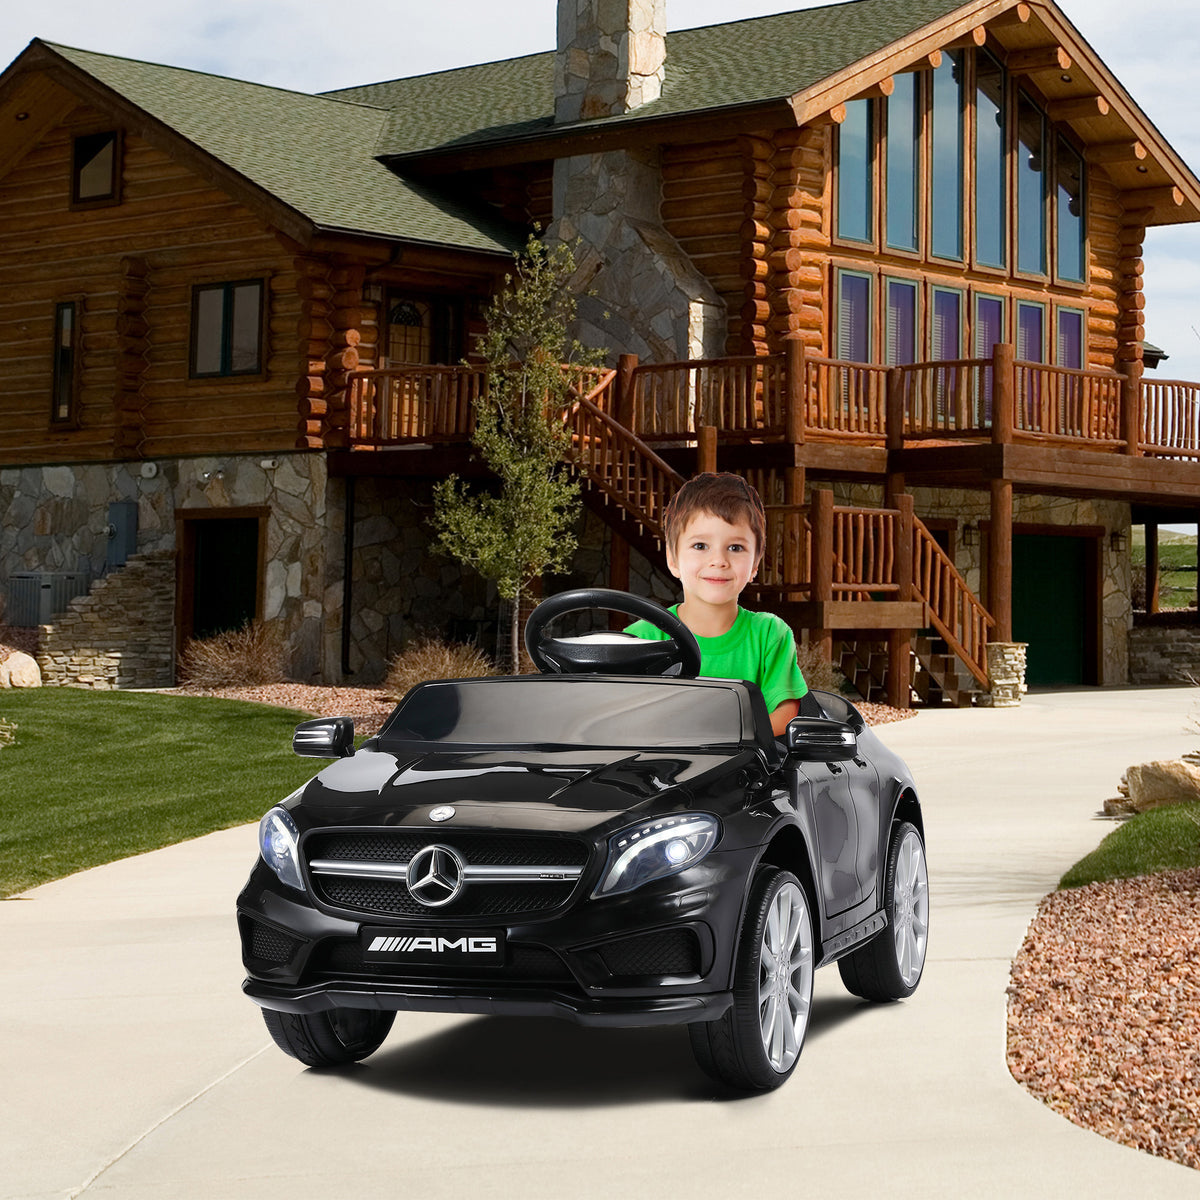 6V Kid Ride on Car Electric Vehicle with Parental Remote Control, MP3 Player, Headlights (Black)